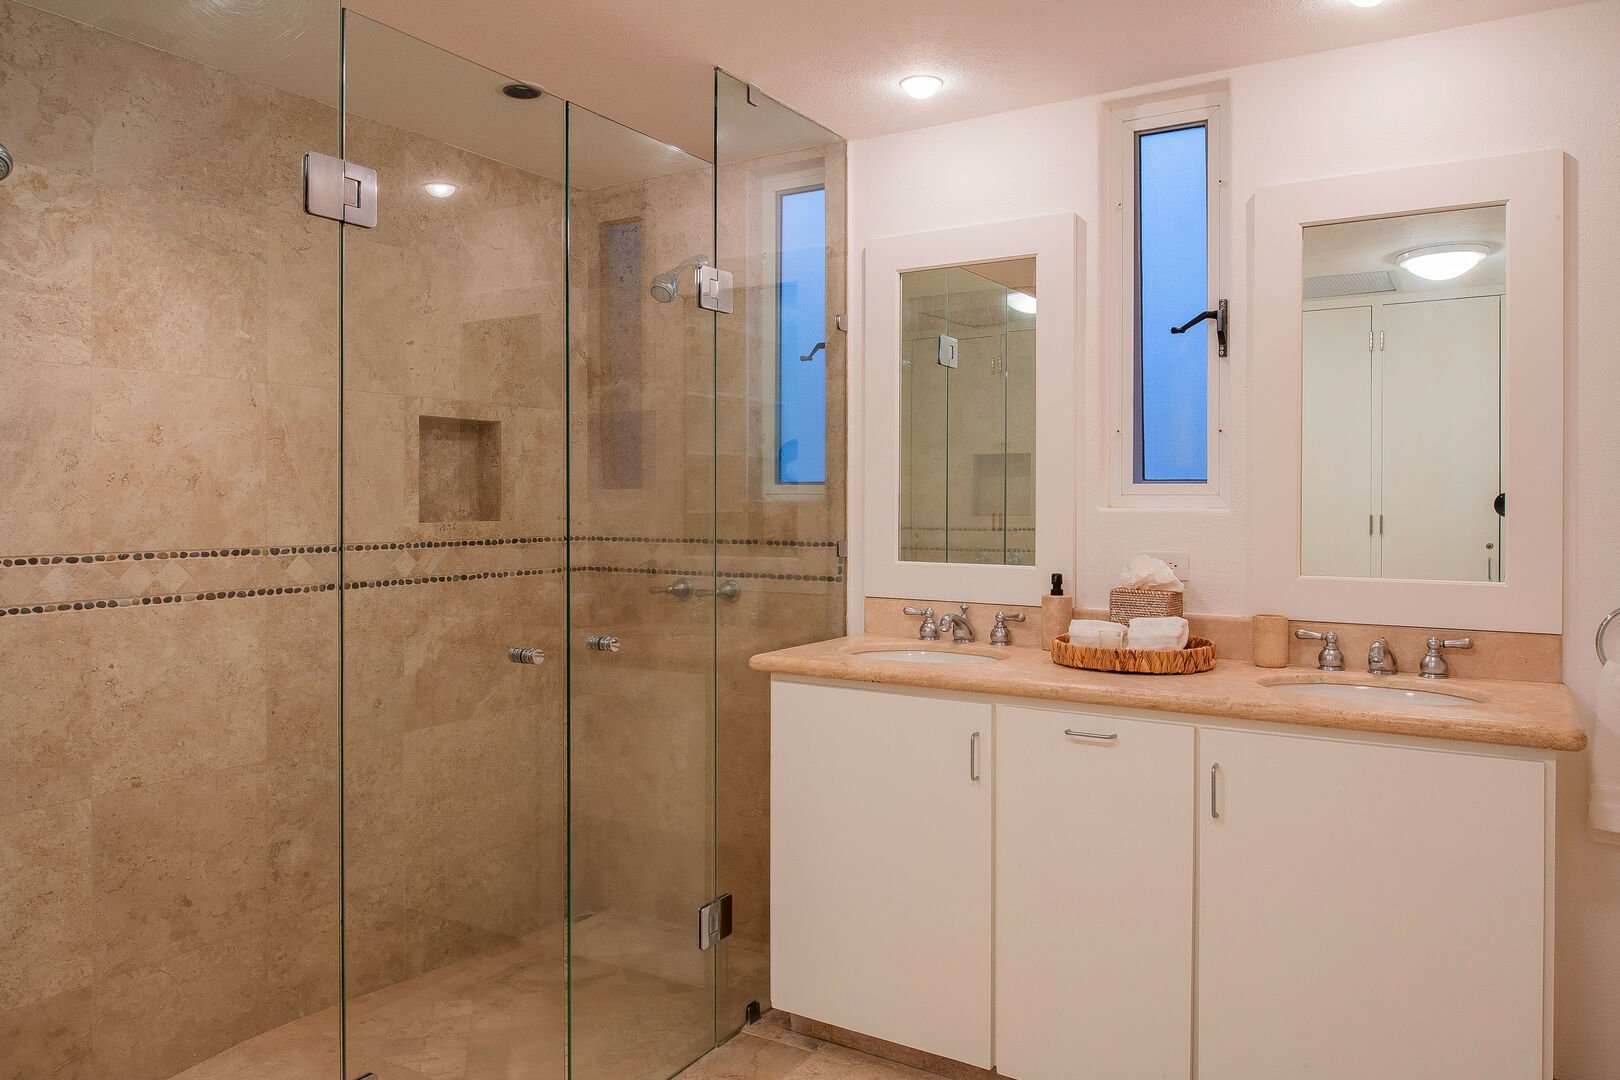 A large shower with a double vanity in the 6th bathroom.